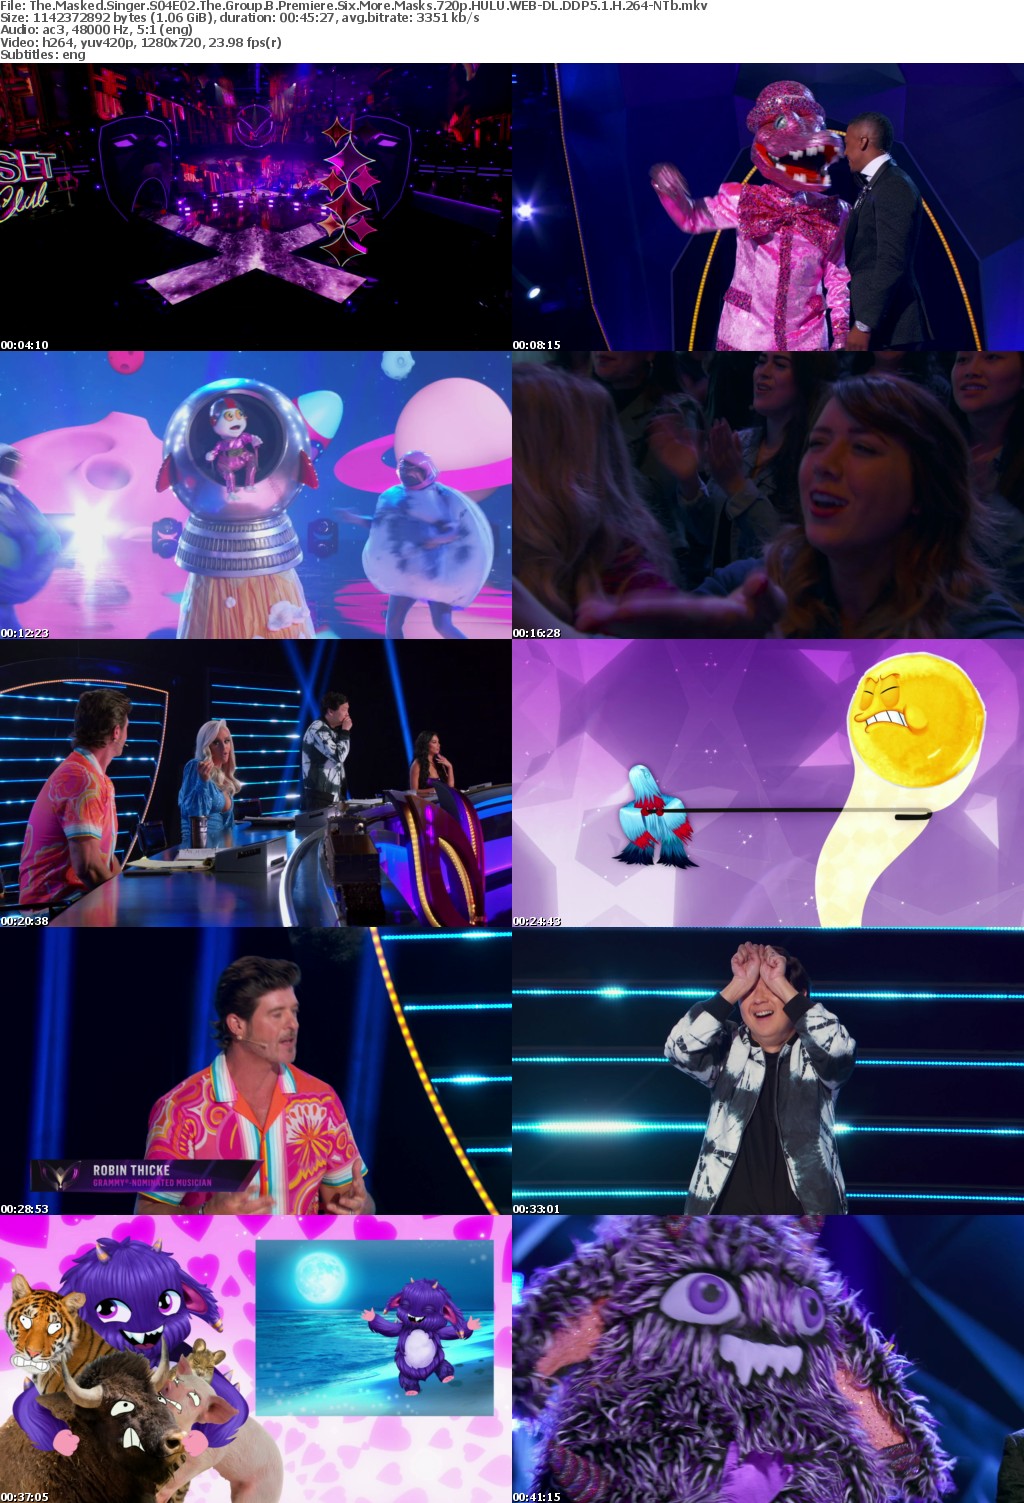 The Masked Singer S04E02 The Group B Premiere Six More Masks 720p HULU WEB-DL DDP5 1 H 264-NTb